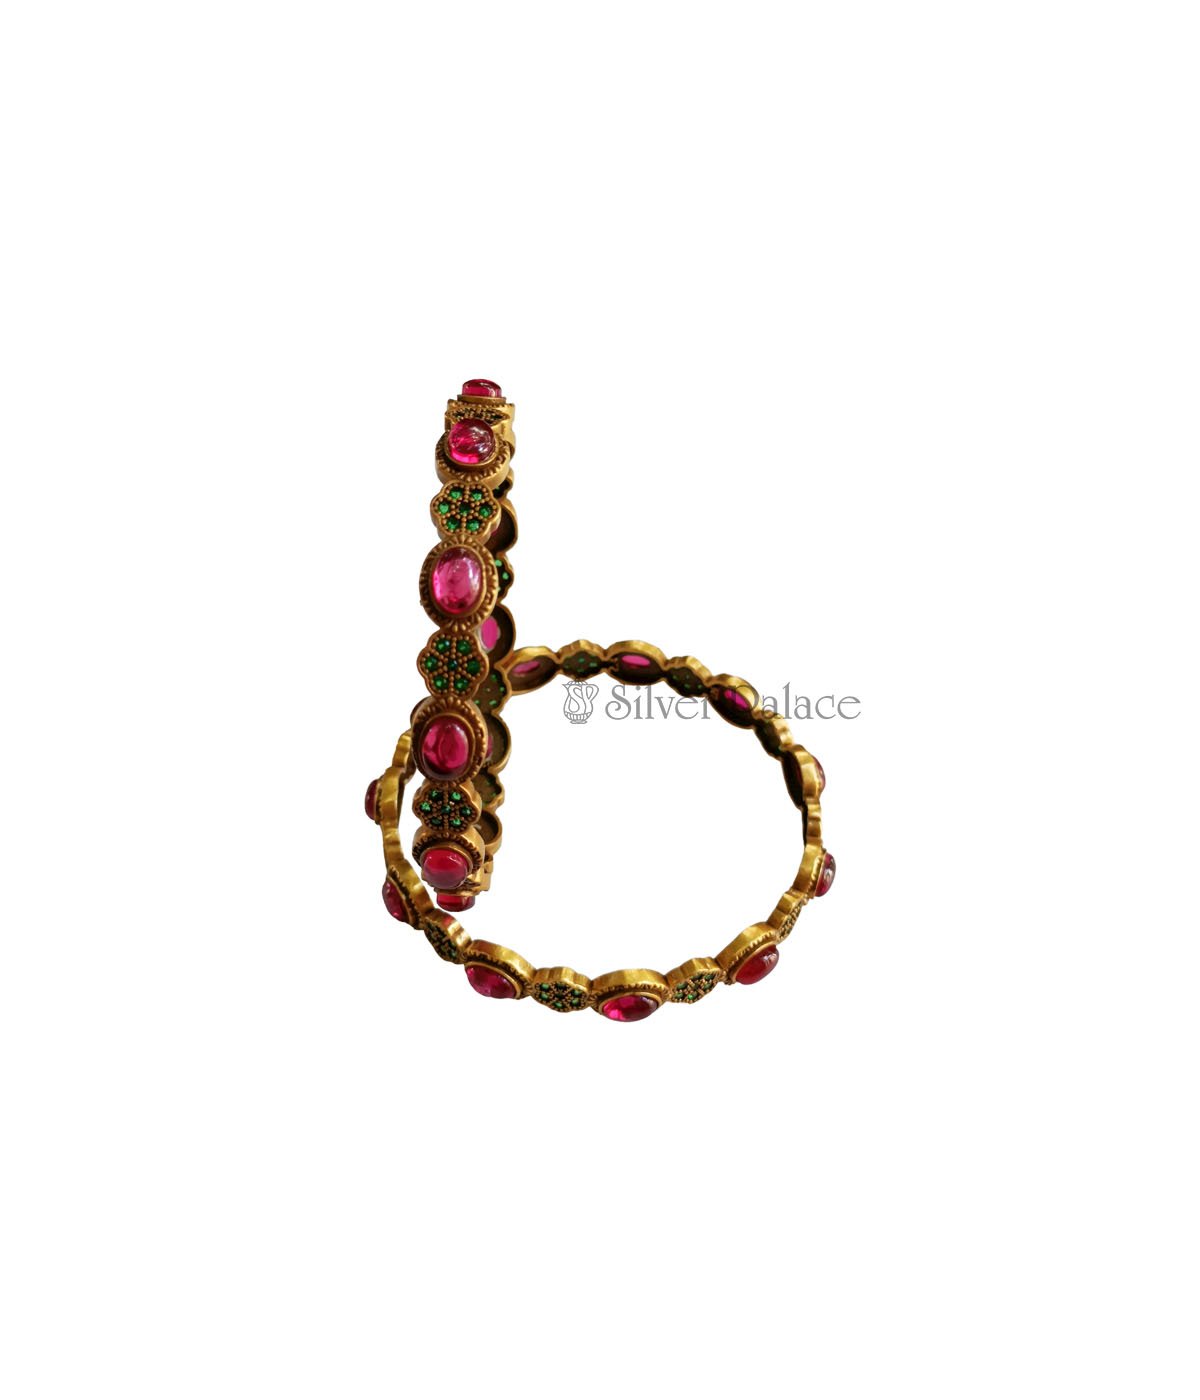 92.5 GOLD POLISH PINK AND GREEN SPINEL STONE BANGLE